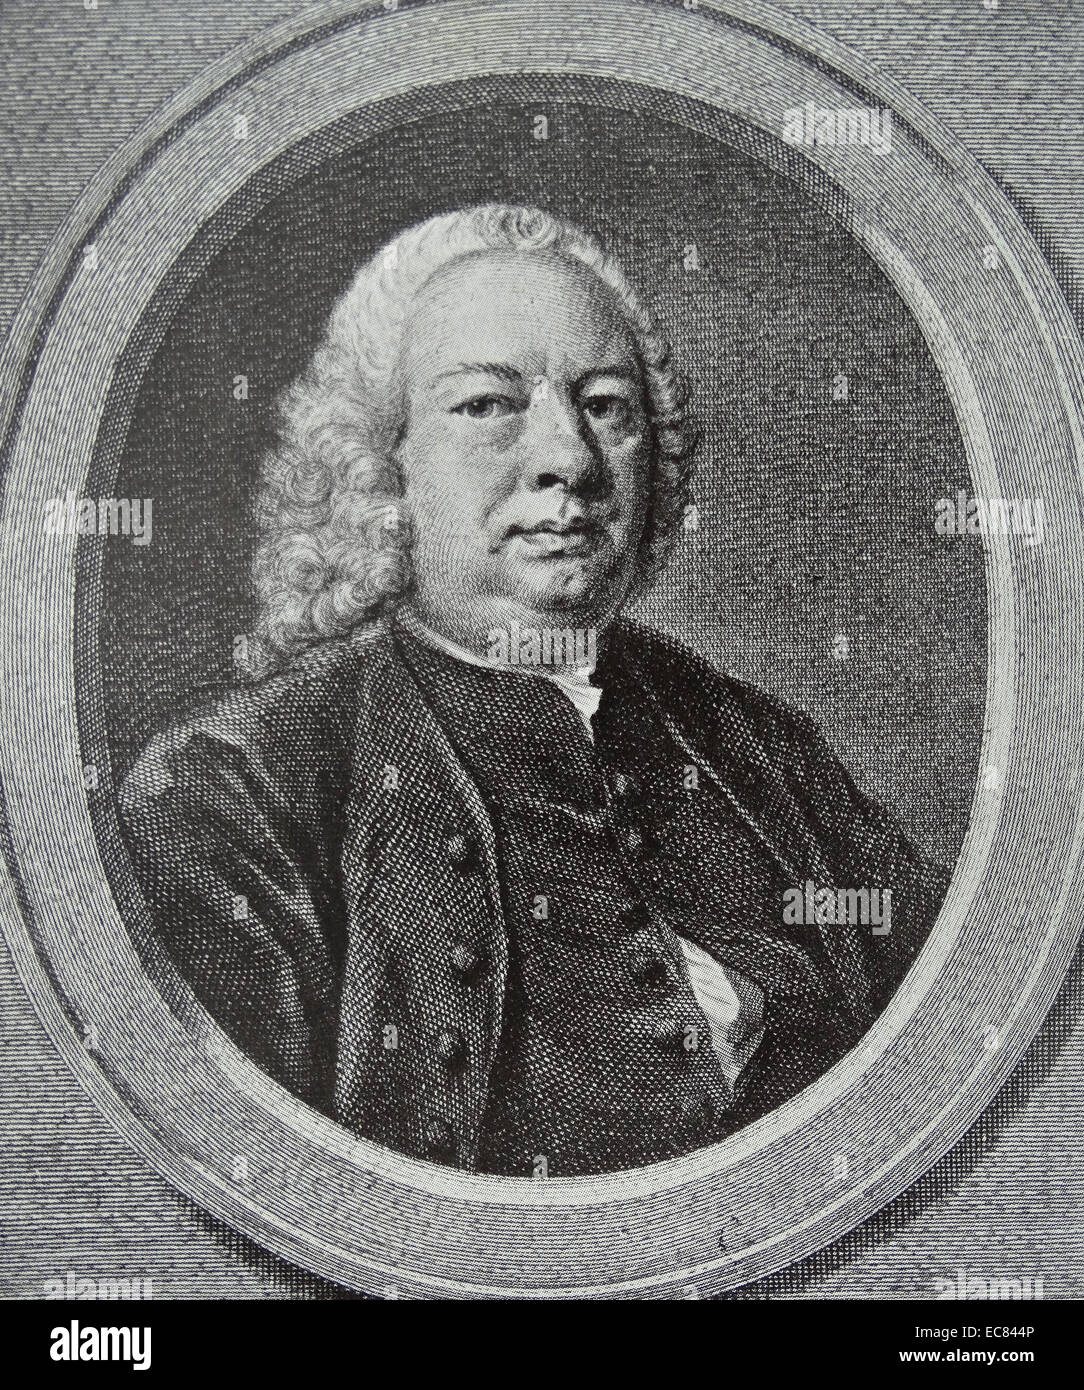 Jacob Gilles in 1757. Jacob Gilles (ca. 1691 in Kollum – September 10; 1765 in Ypenburg manor near Rijswijk) was Grand Pensionary of Holland from September 23; 1746 to June 18; 1749. Stock Photo